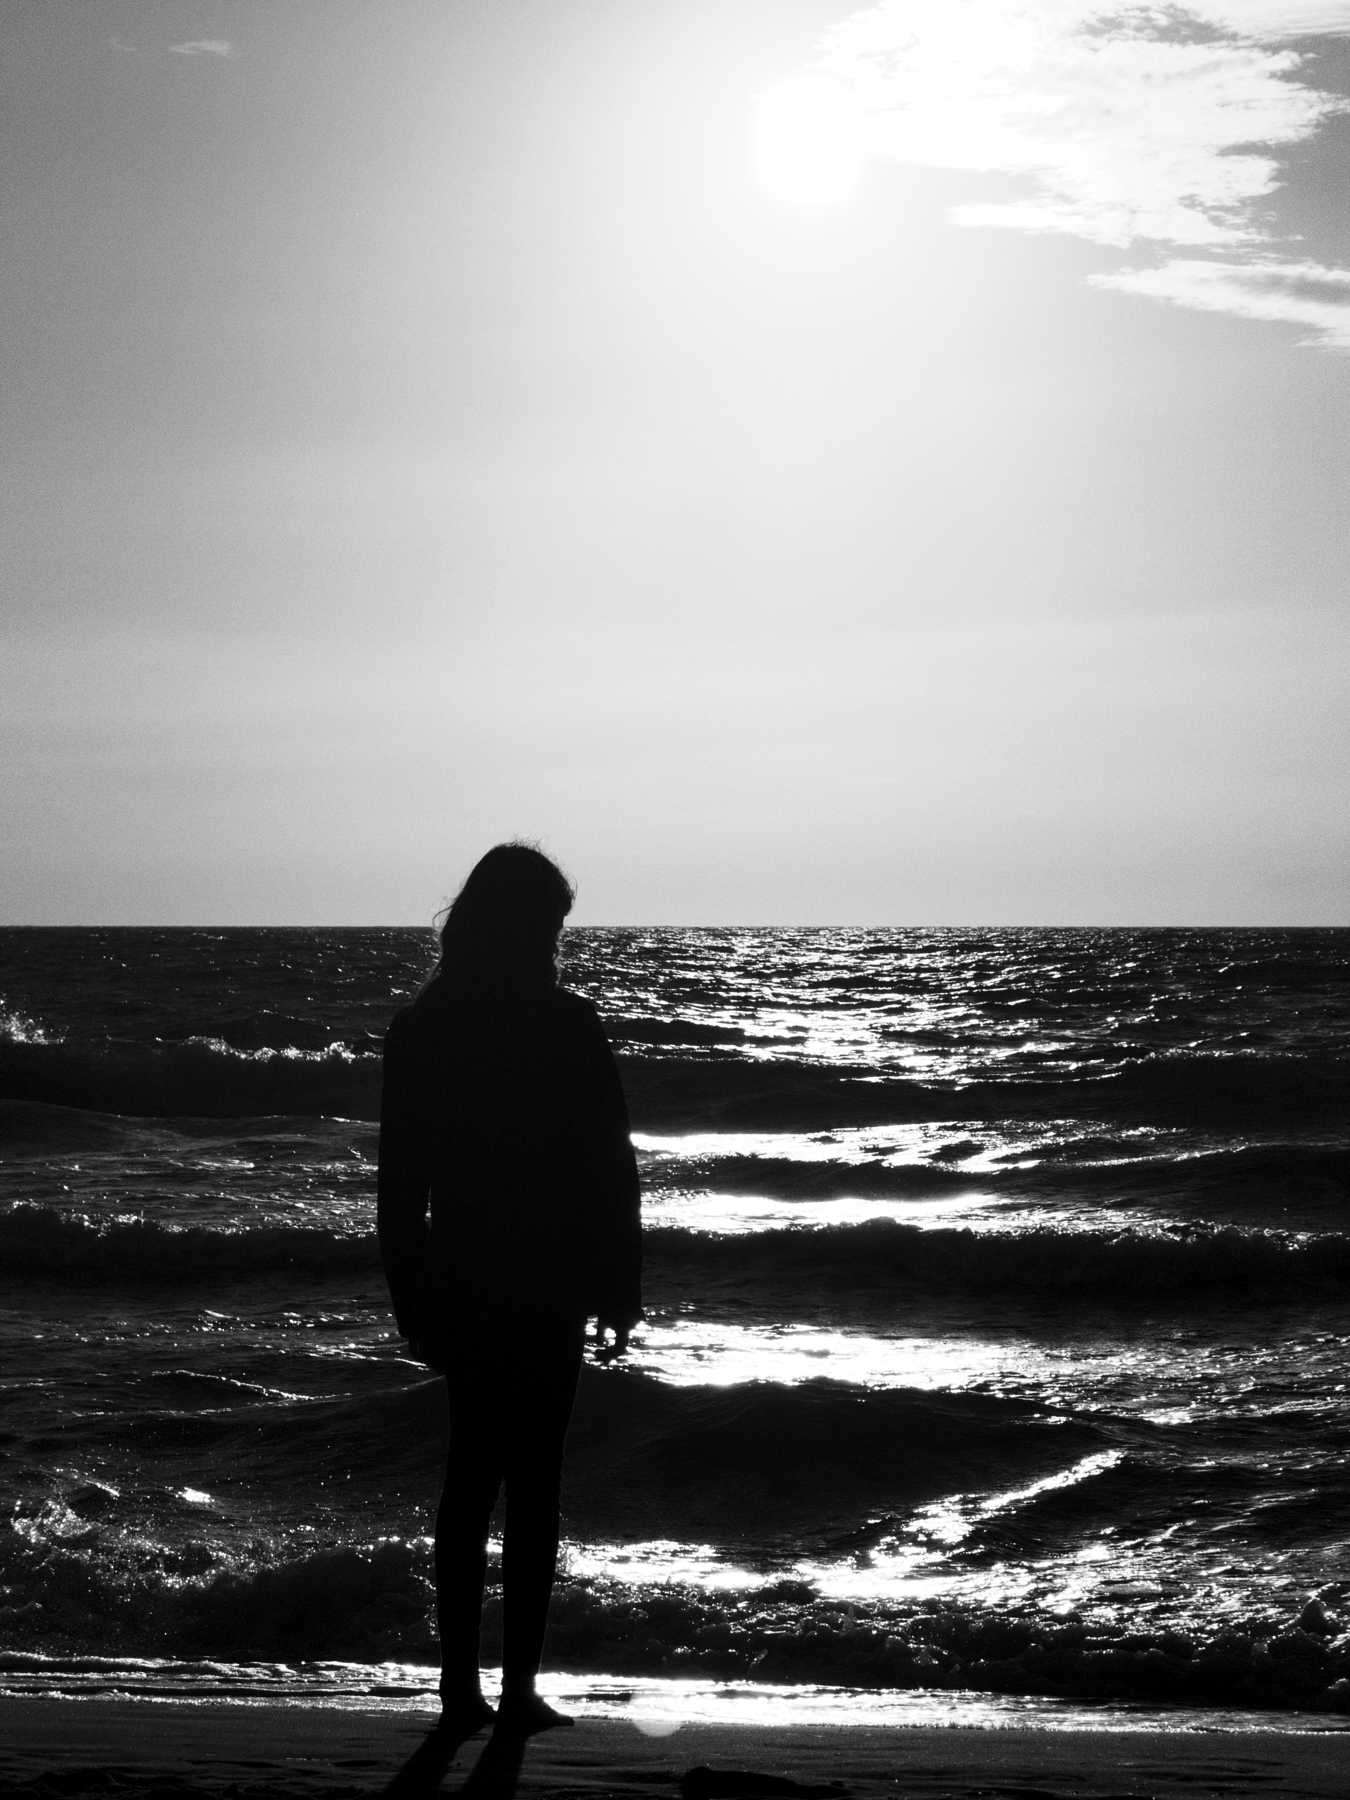 Silhouette of a person standing on a beach, facing the ocean during sunset or sunrise. The sky and water have a bright, reflective quality, and the overall appearance is in black and white.